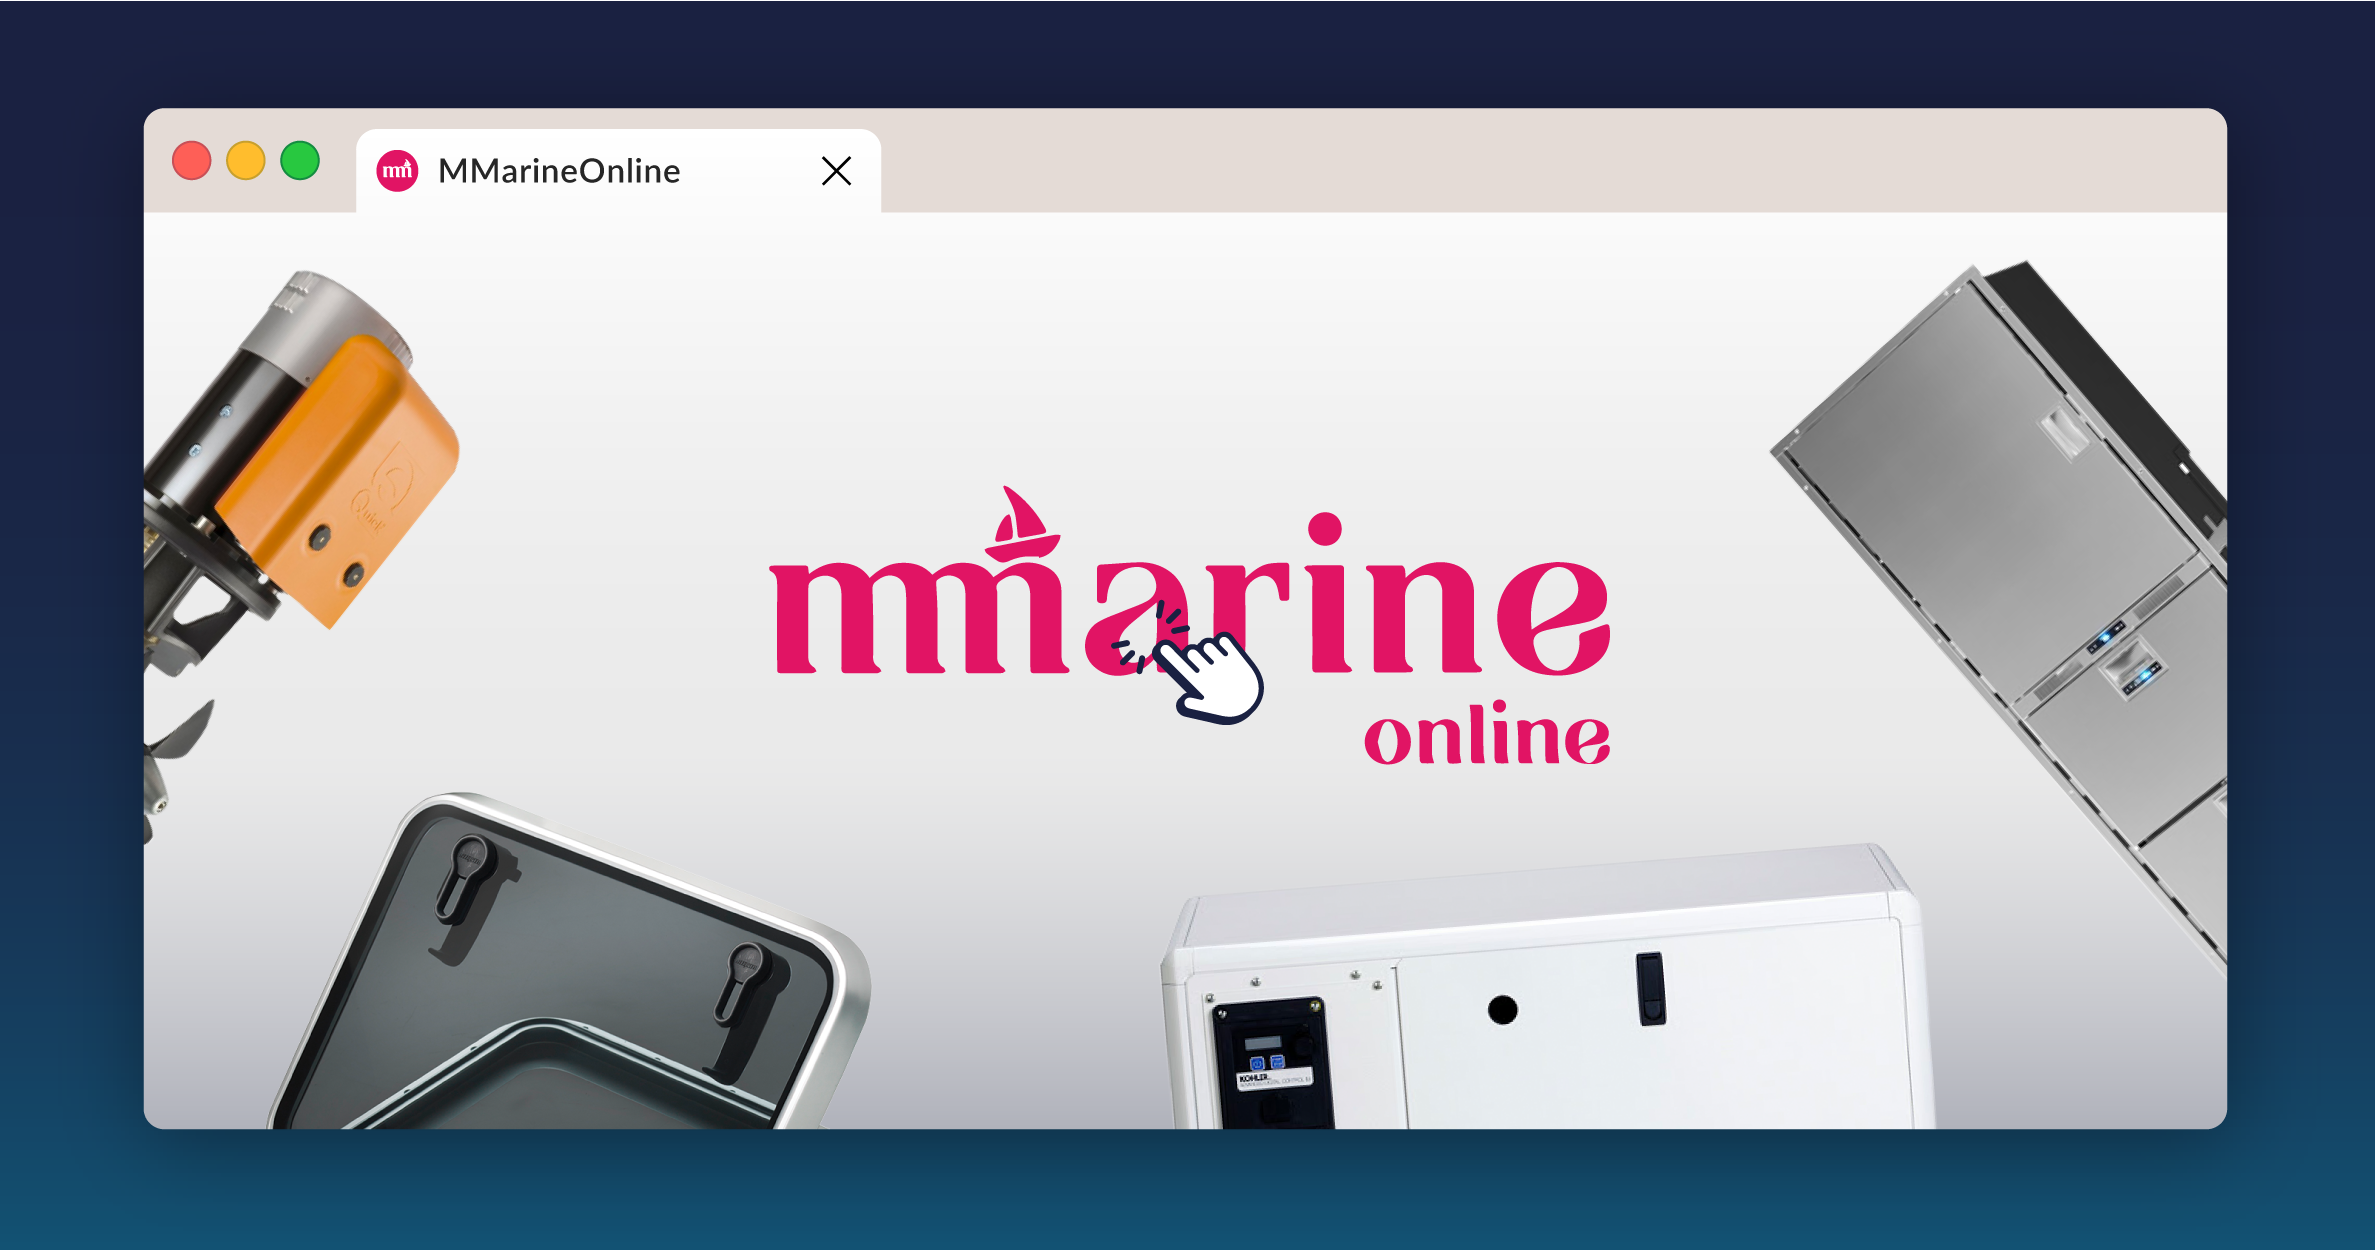 MMarine Online is thrilled to announce the much-anticipated launch of our new website